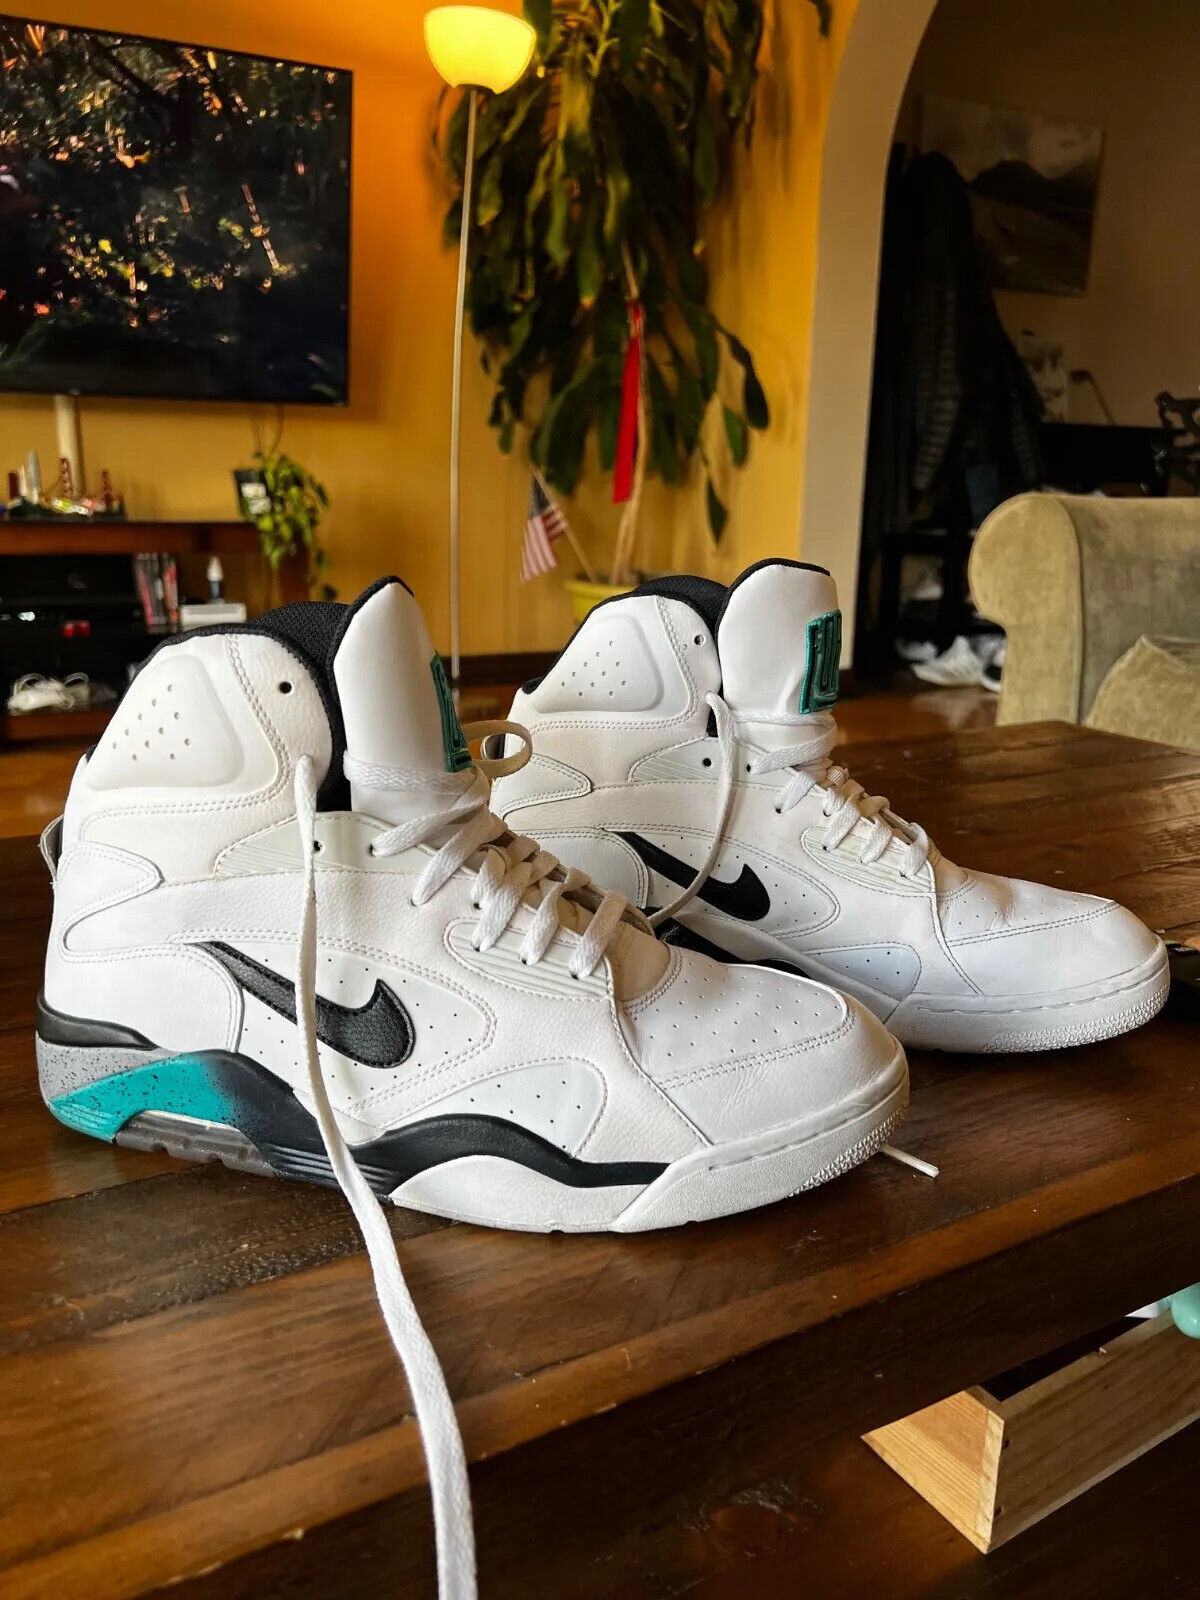 Size 11.5 - Nike Air 180 Mid White Grey Emerald 2012 - Excellent Condition | eBay